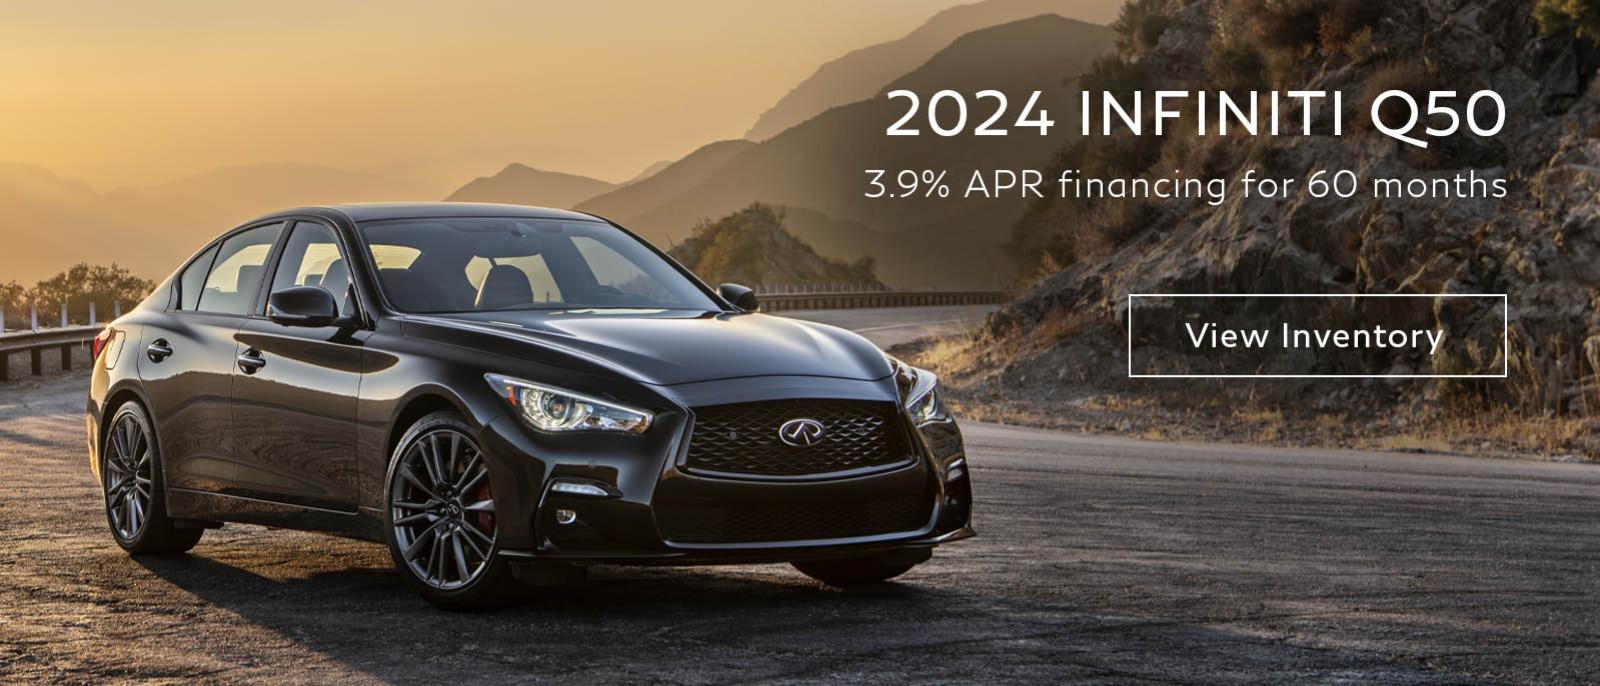 3.9% APR Financing for 60 Months on 2024 INFINITI Q50